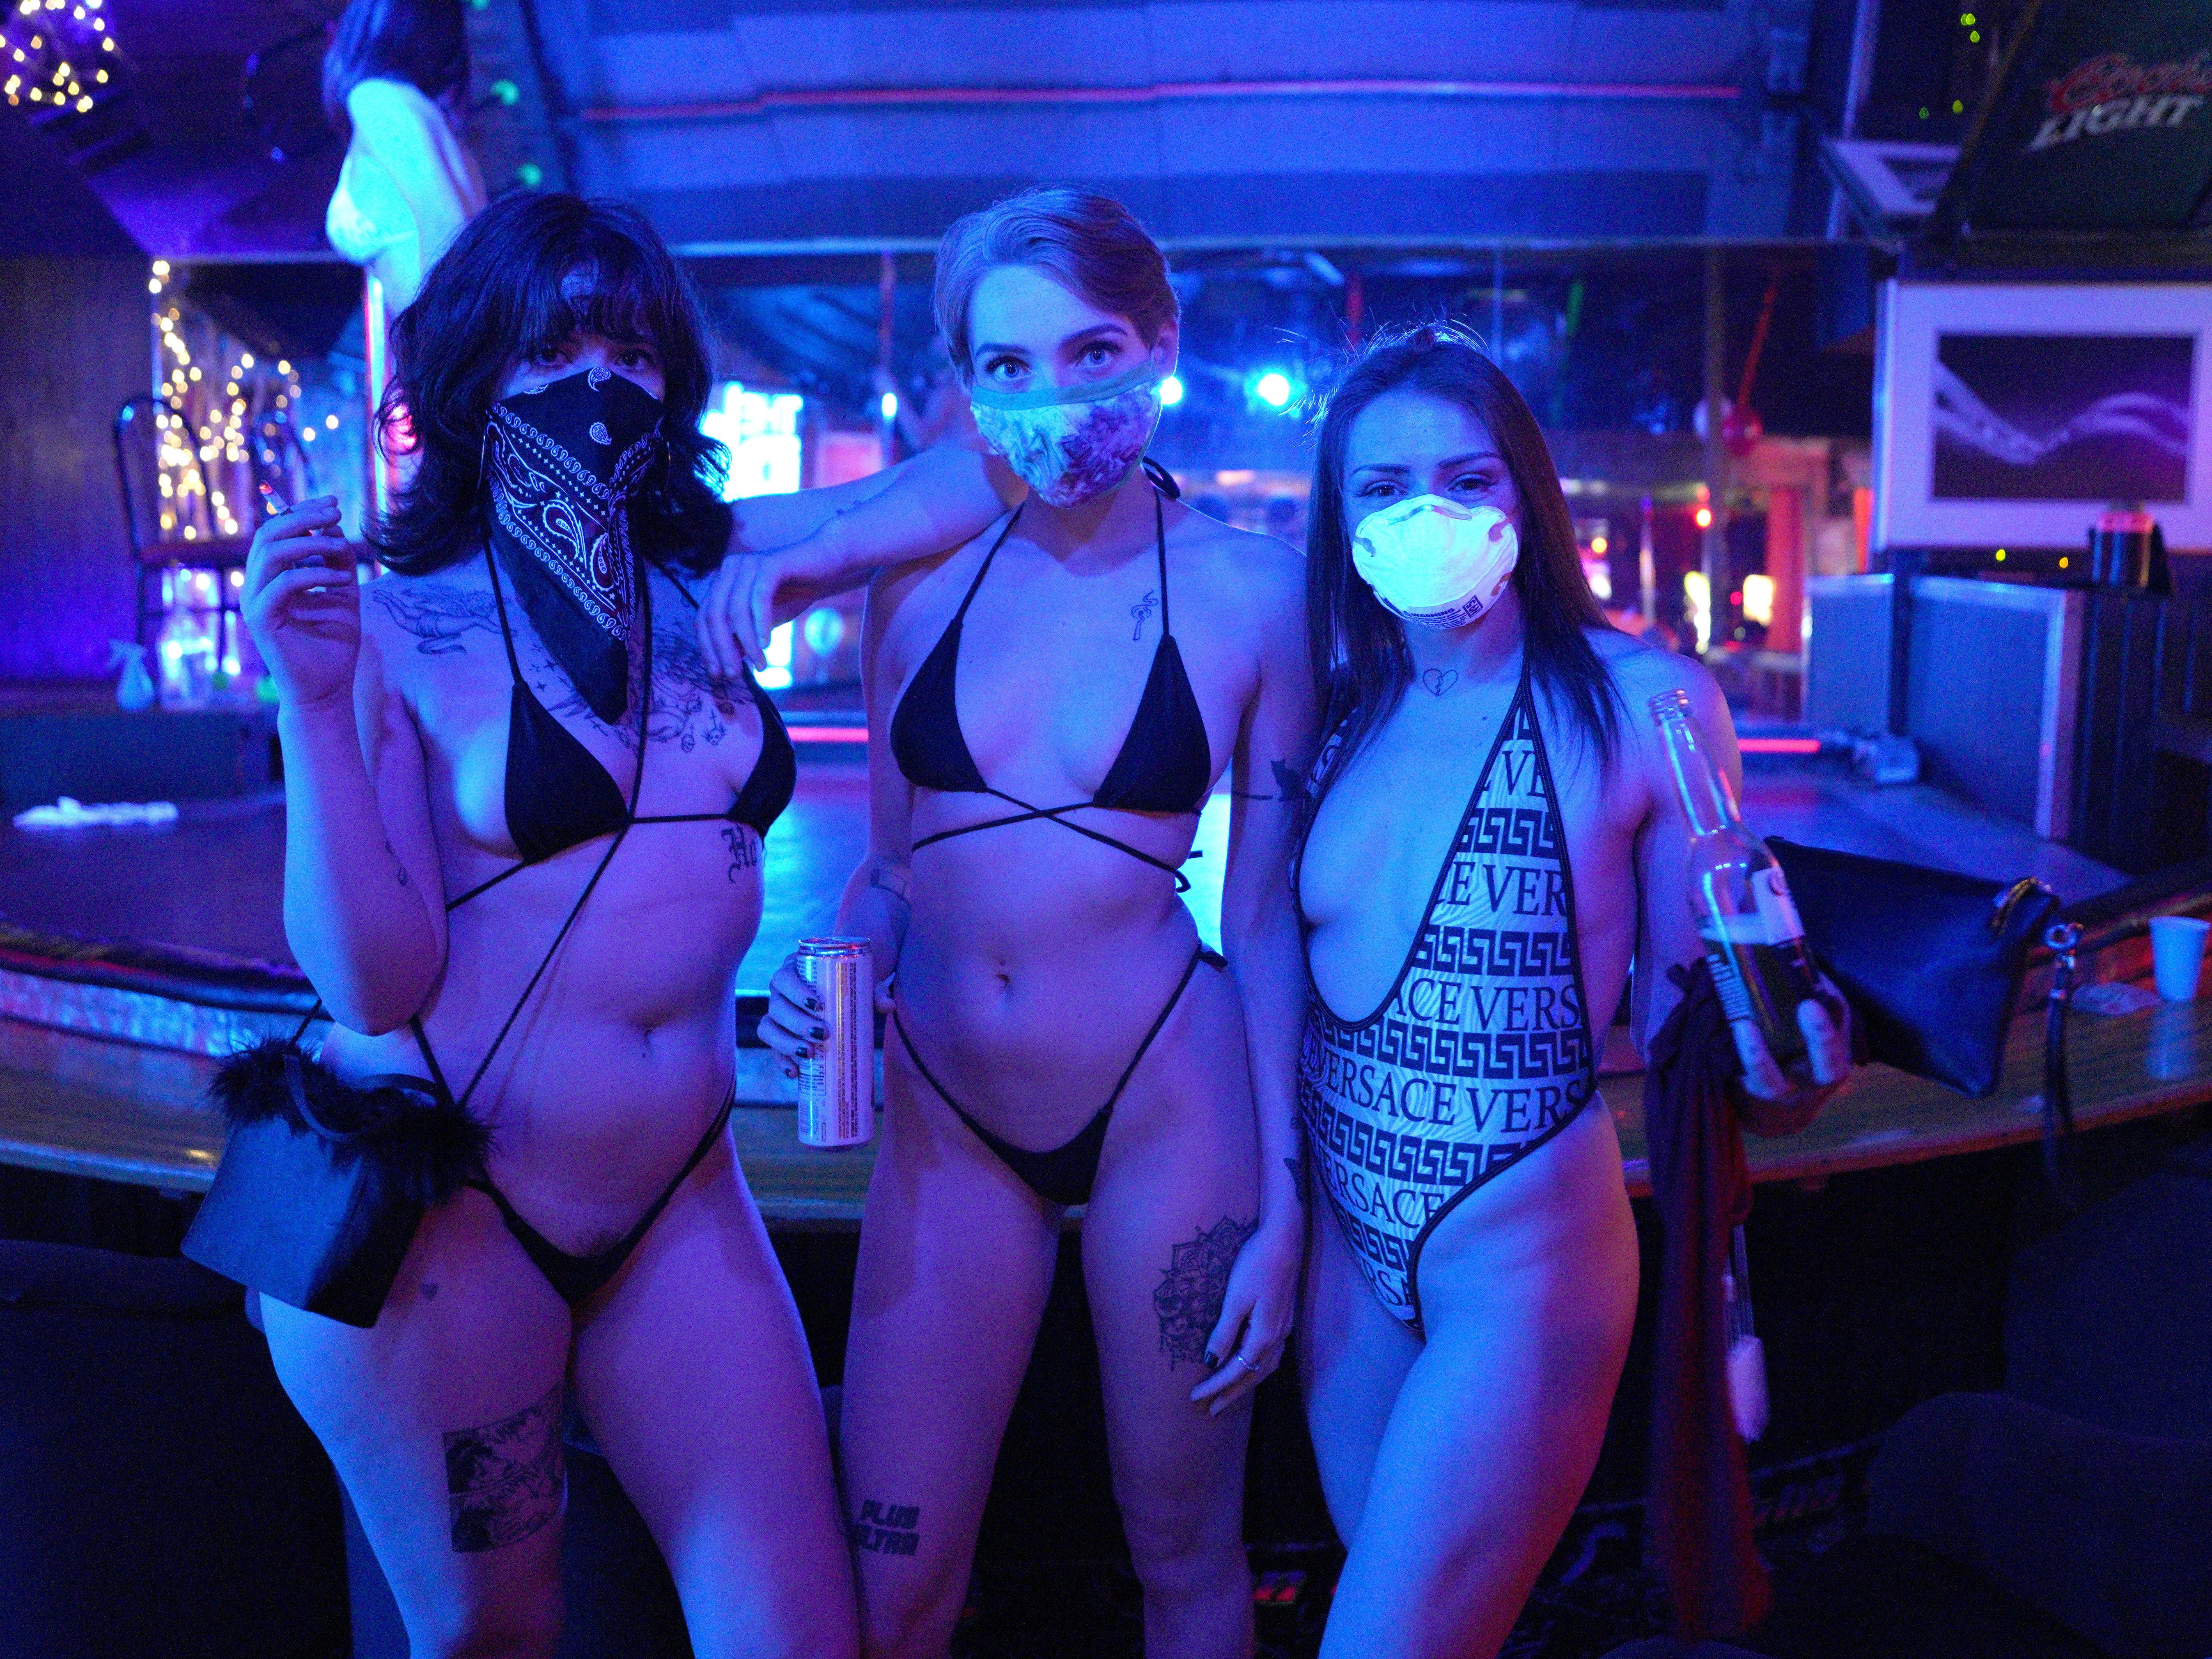 dhee yach recommends naked women at strip club pic